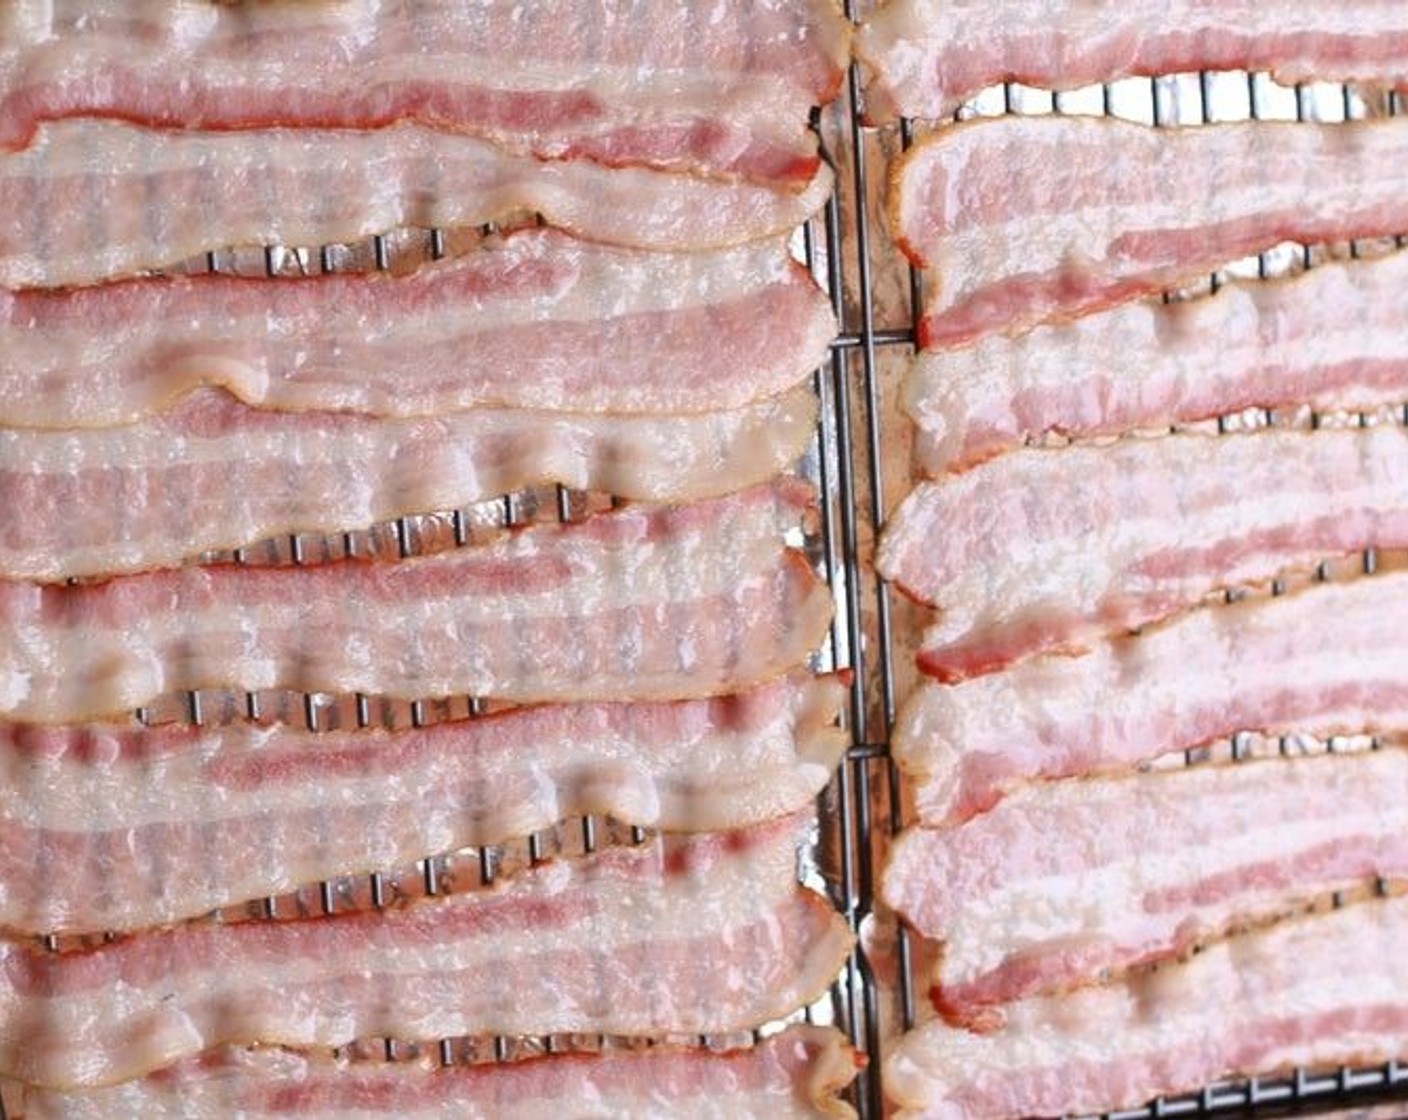 step 2 Arrange Applewood Smoked Bacon (1 lb) in a single layer on the rack. Bake for 12 minutes.